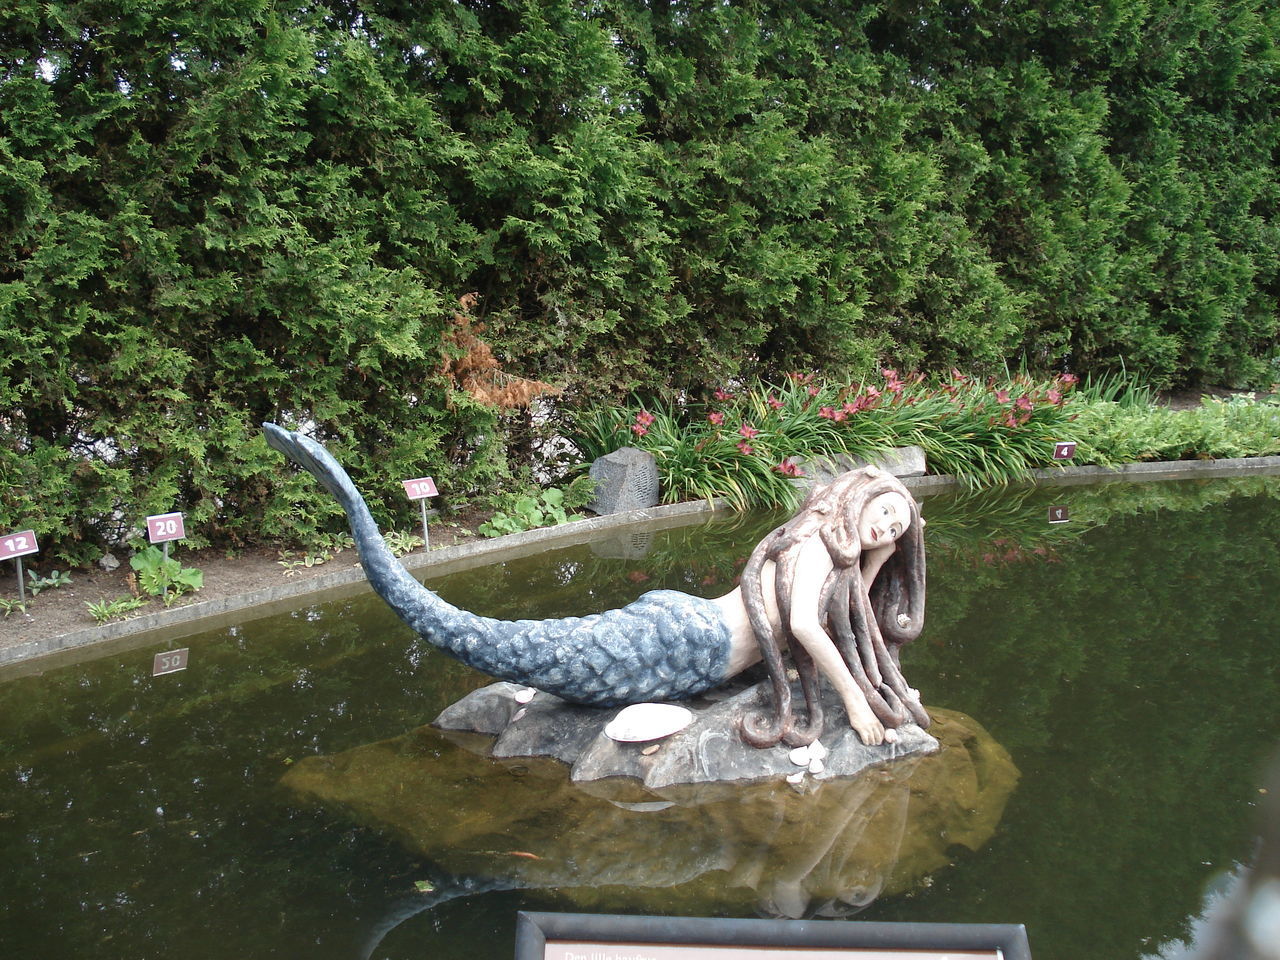 STATUE IN PARK BY WATER